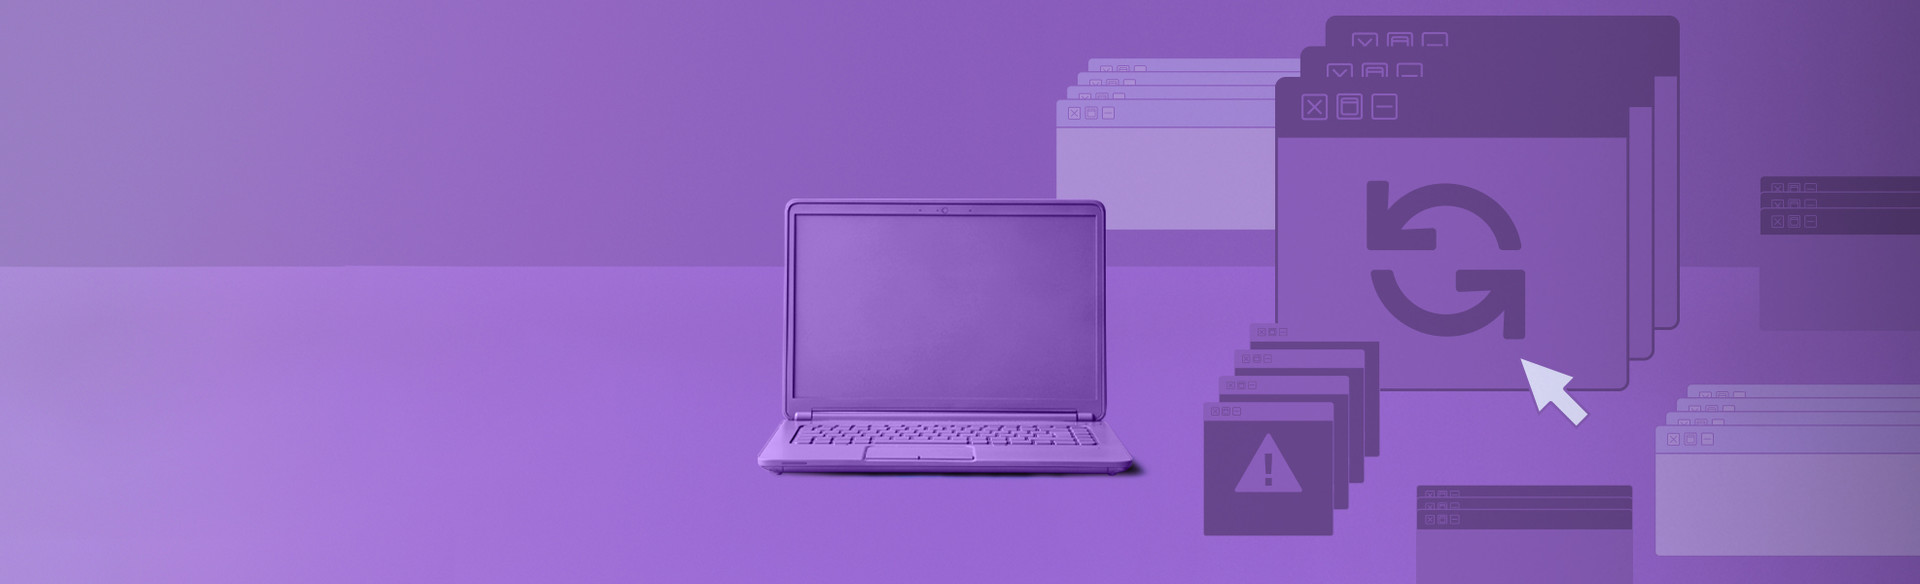 Image of a laptop and illustration of files